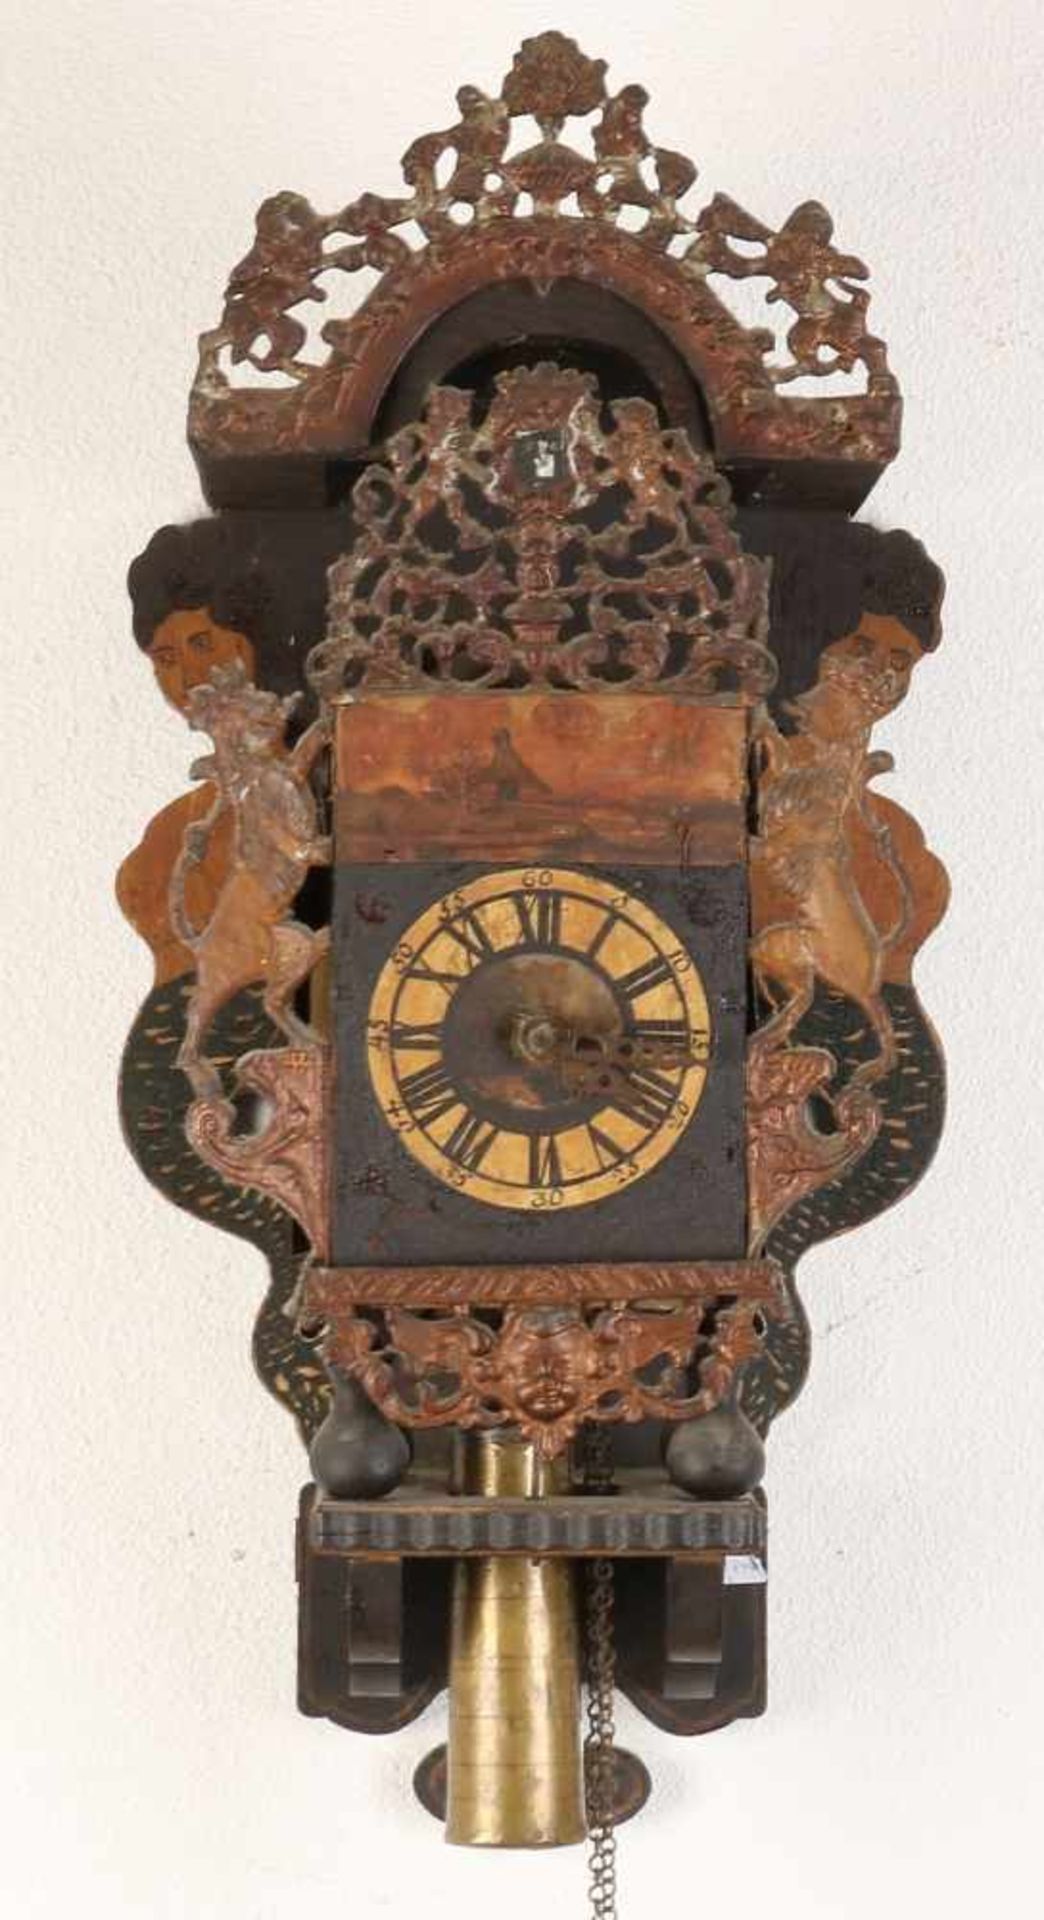 18th - 19th Century Frisian stool clock. Fire. Dimensions: 72 cm. In reasonable condition.